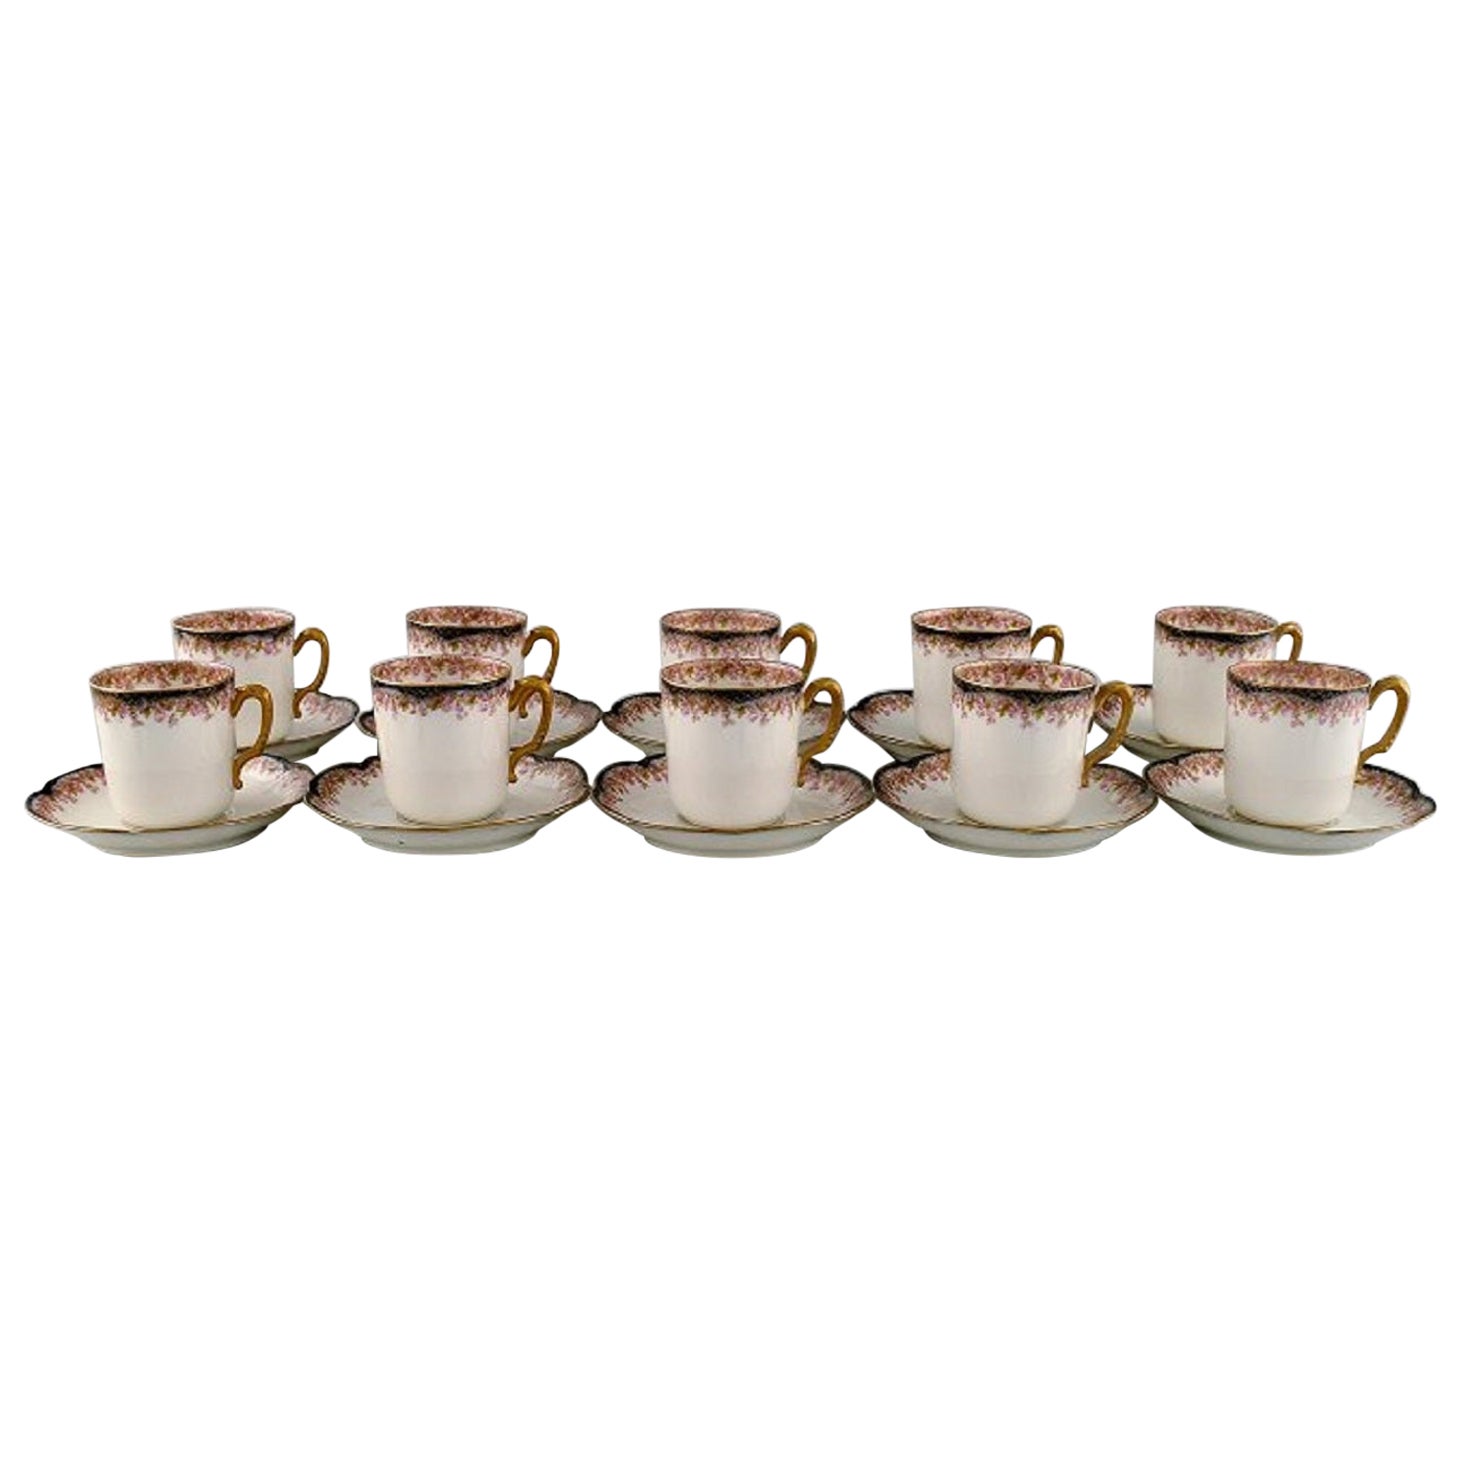 Limoges, France, 10 Mocha Cups with Saucers in Hand-Painted Porcelain